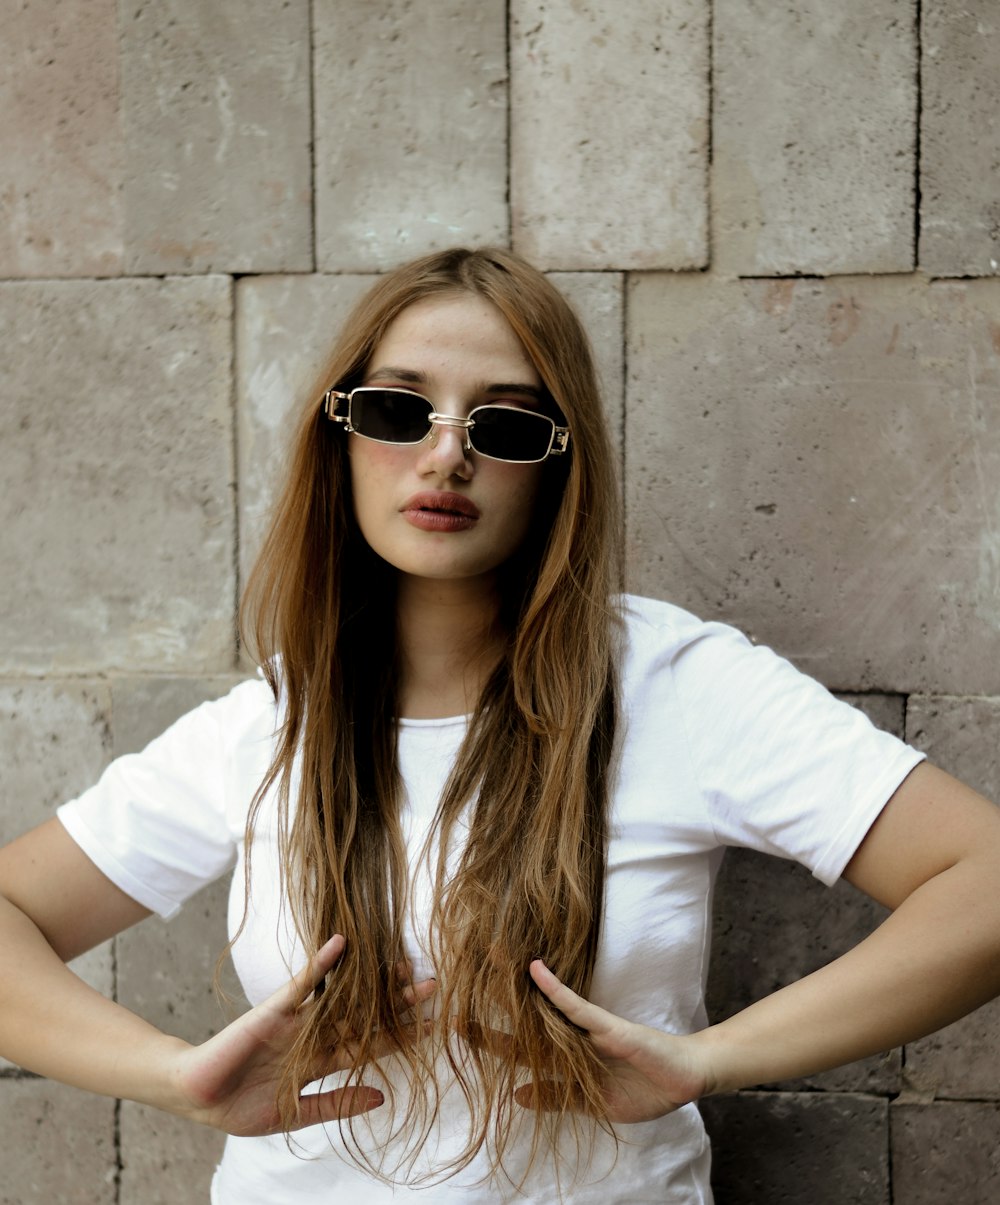 a woman wearing sunglasses standing in front of a brick wall